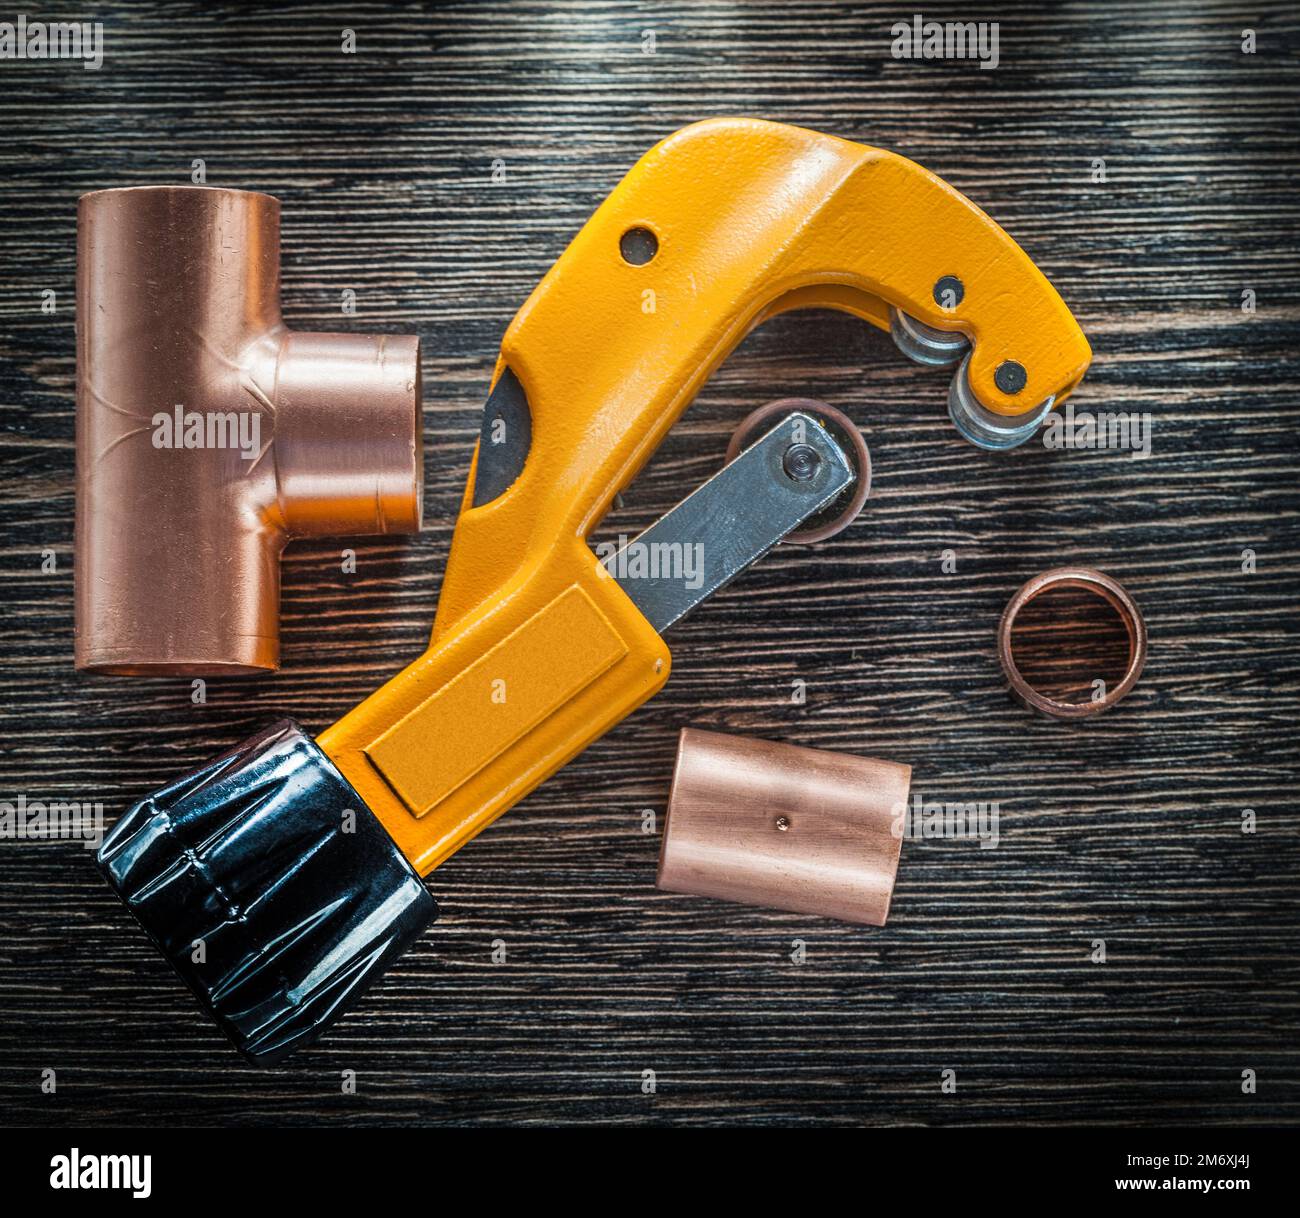 Copper water pipe cutter T-tube on wooden board. Stock Photo